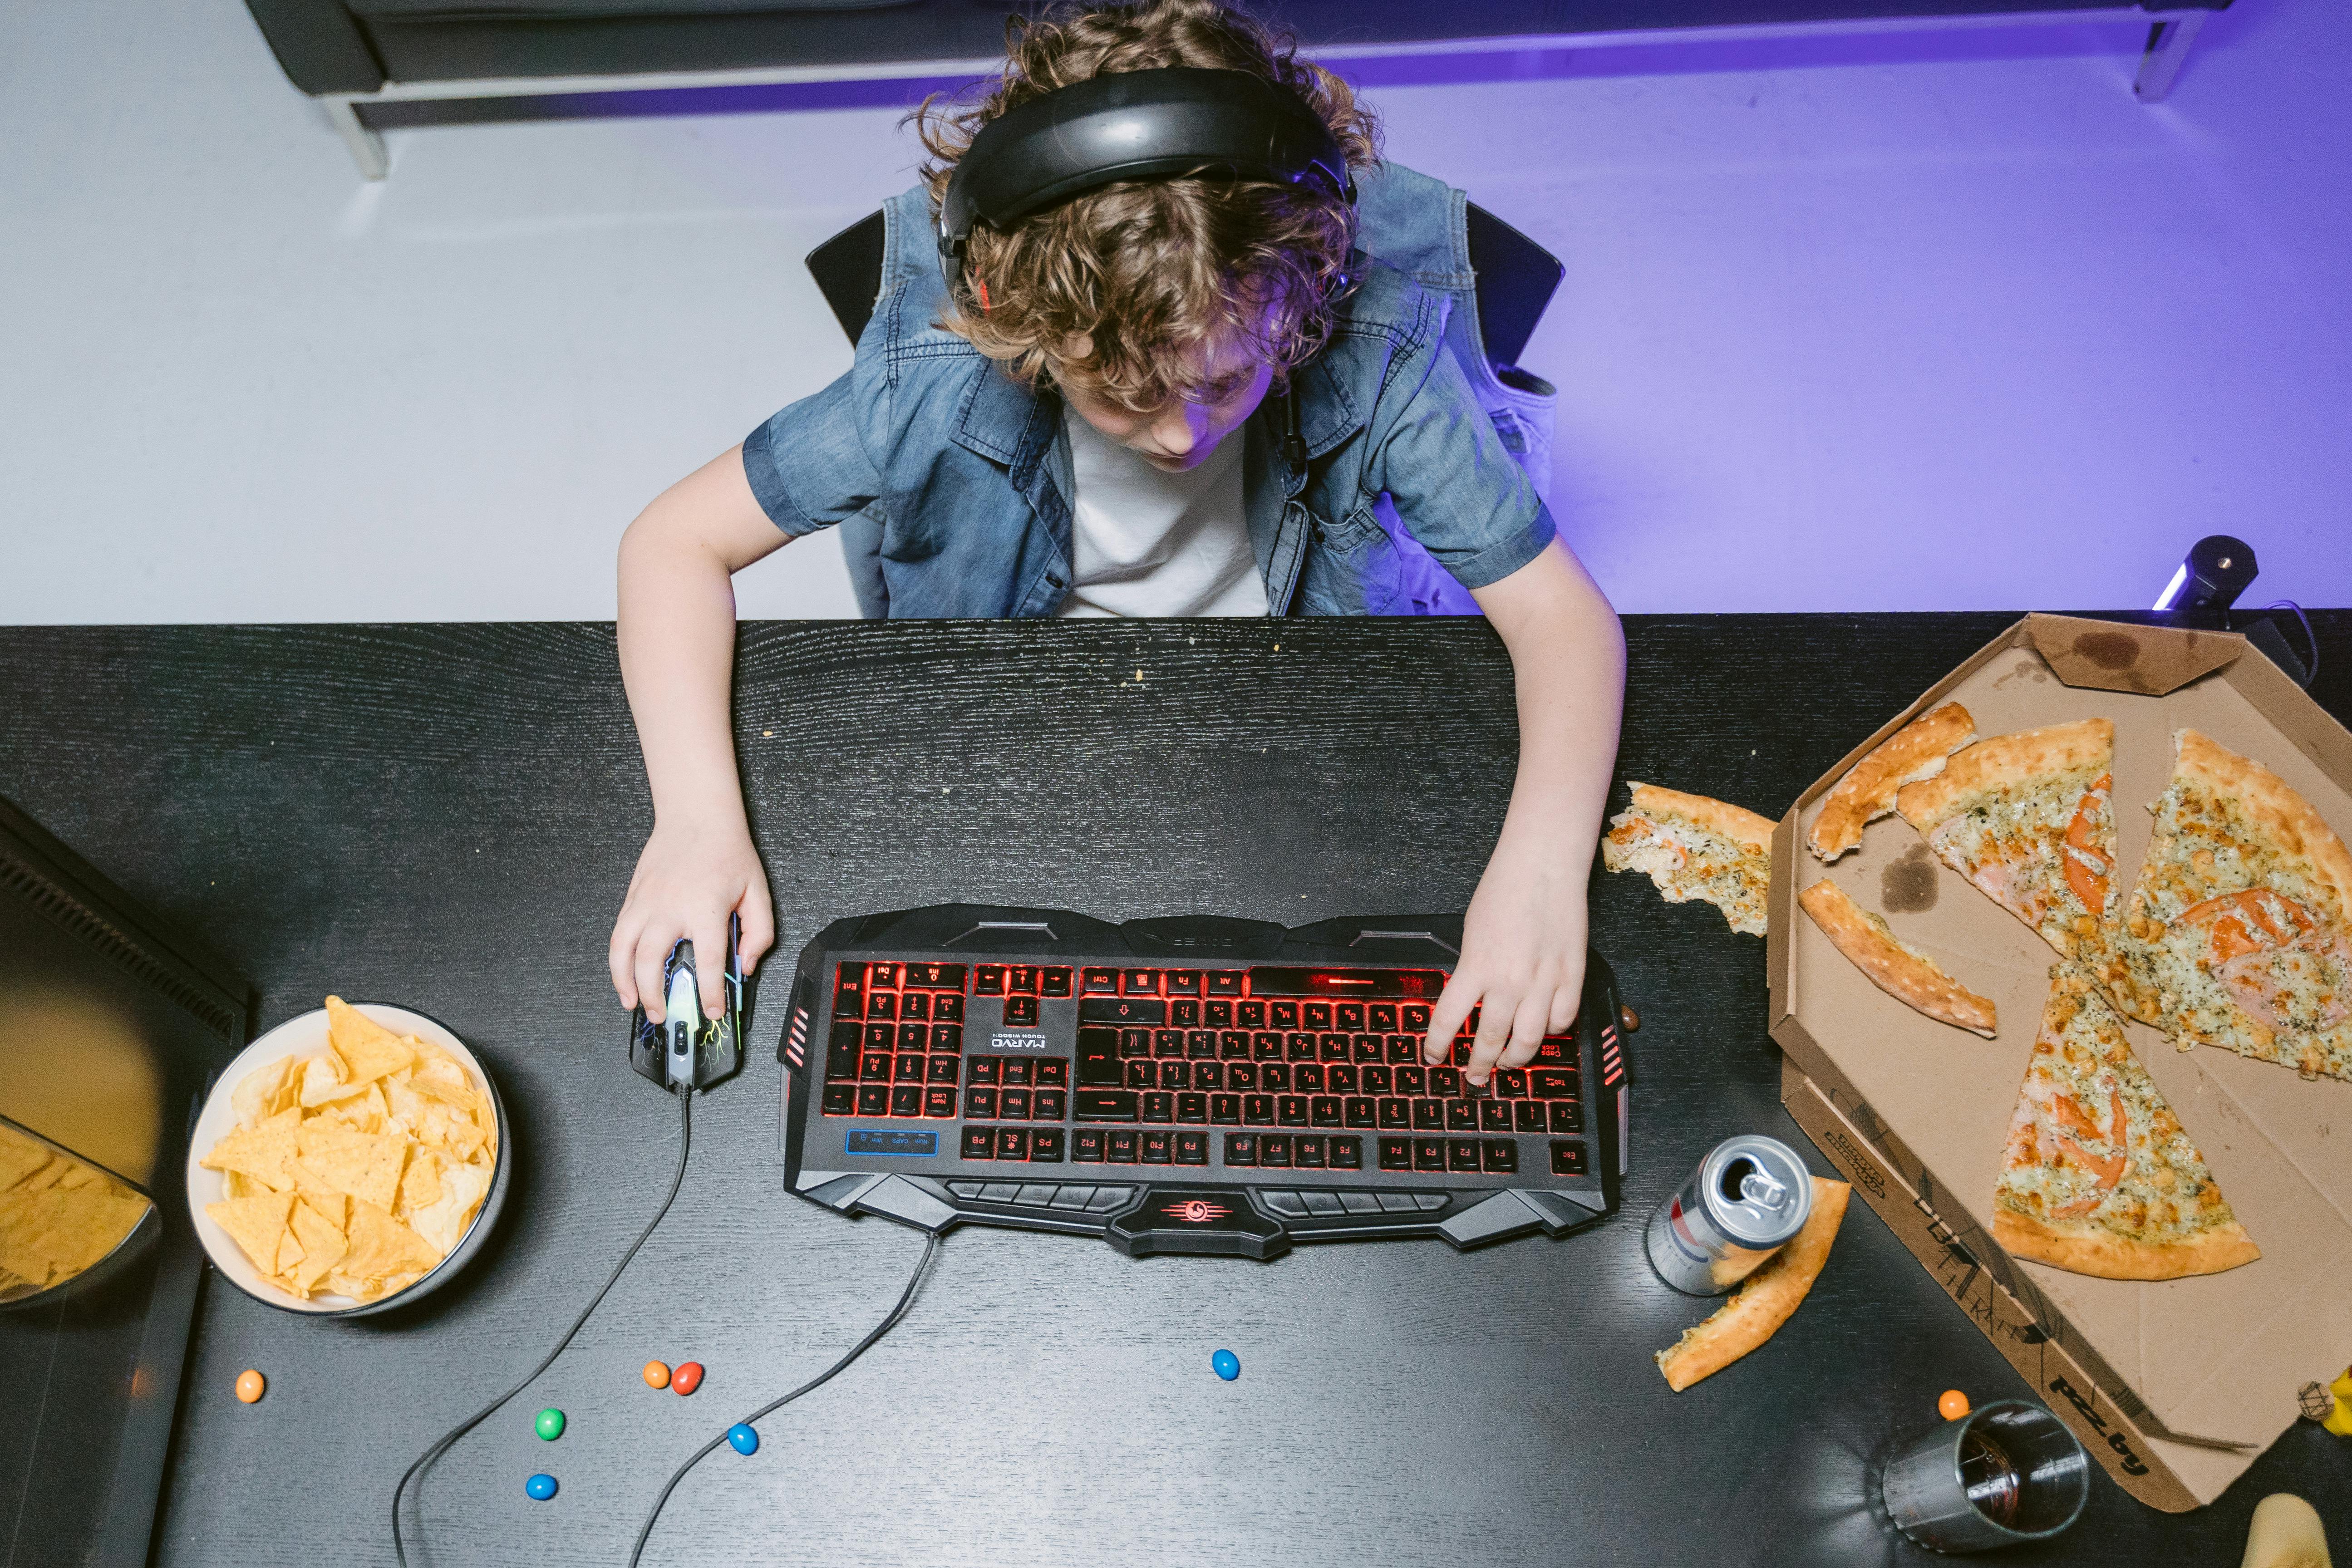 Child using a computer keyboard with pizza, chips, and candy nearby